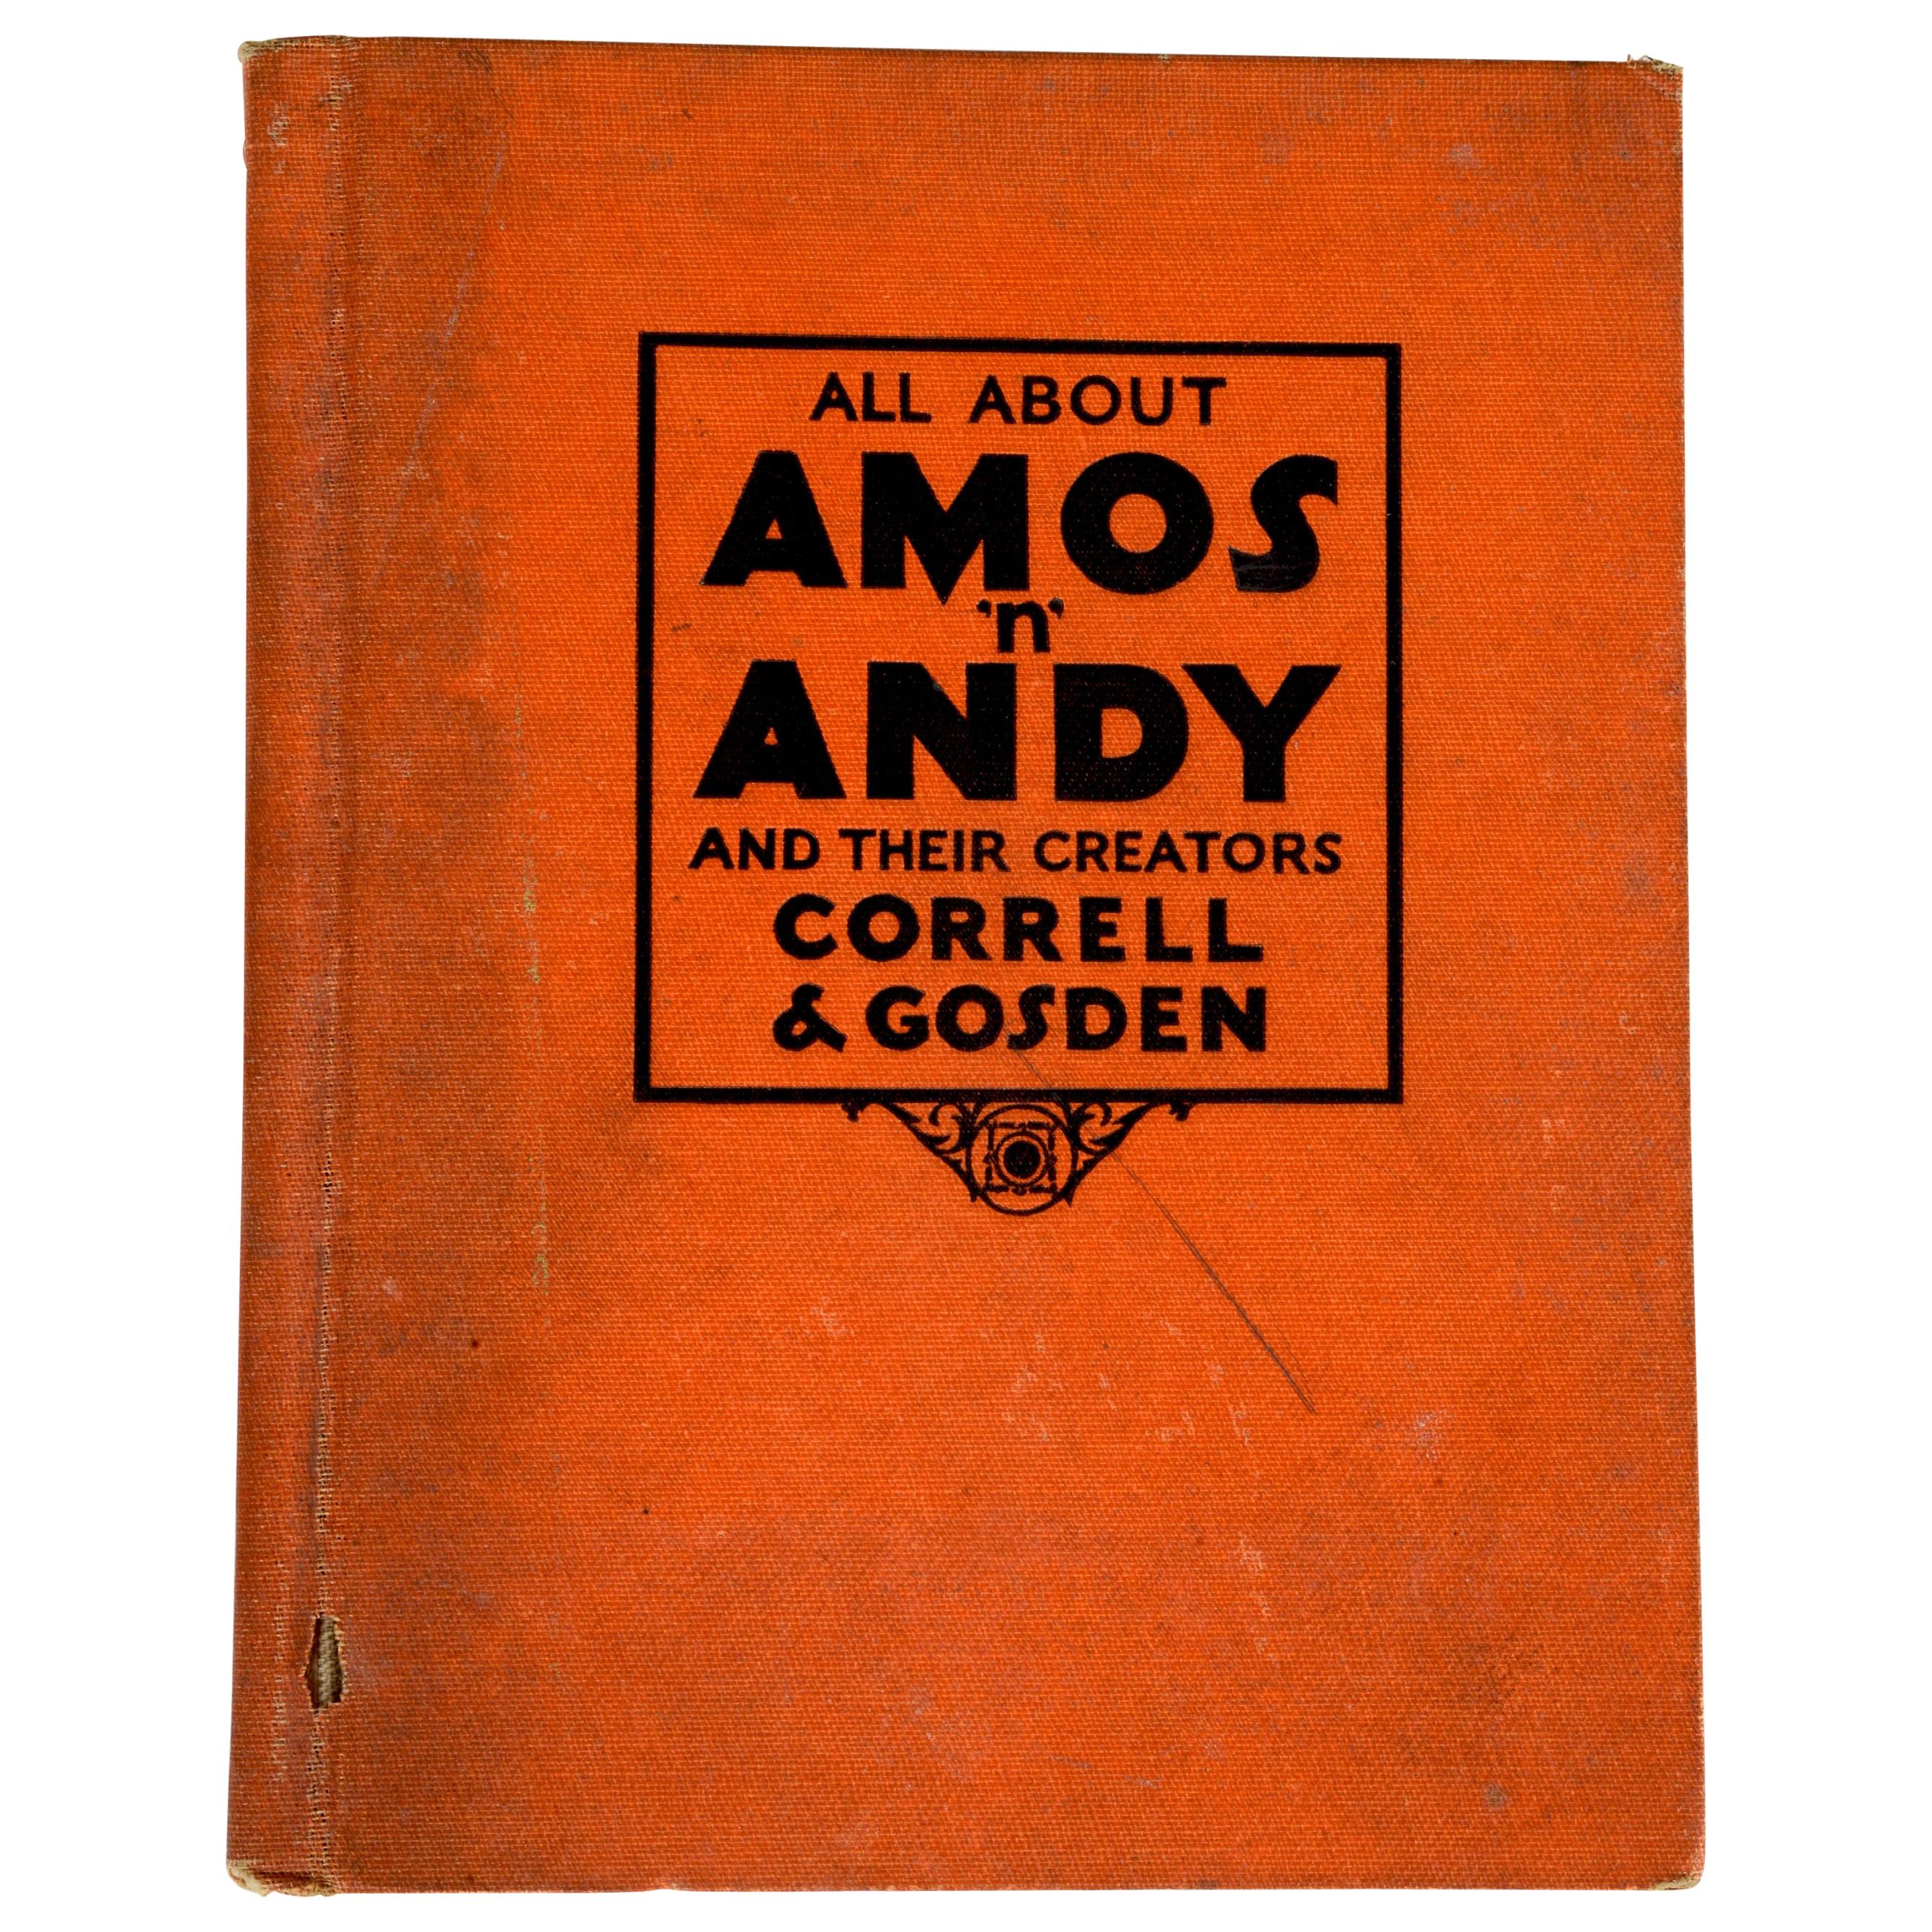 All About Amos 'n' Andy and Their Creators, by Correll & Gosden